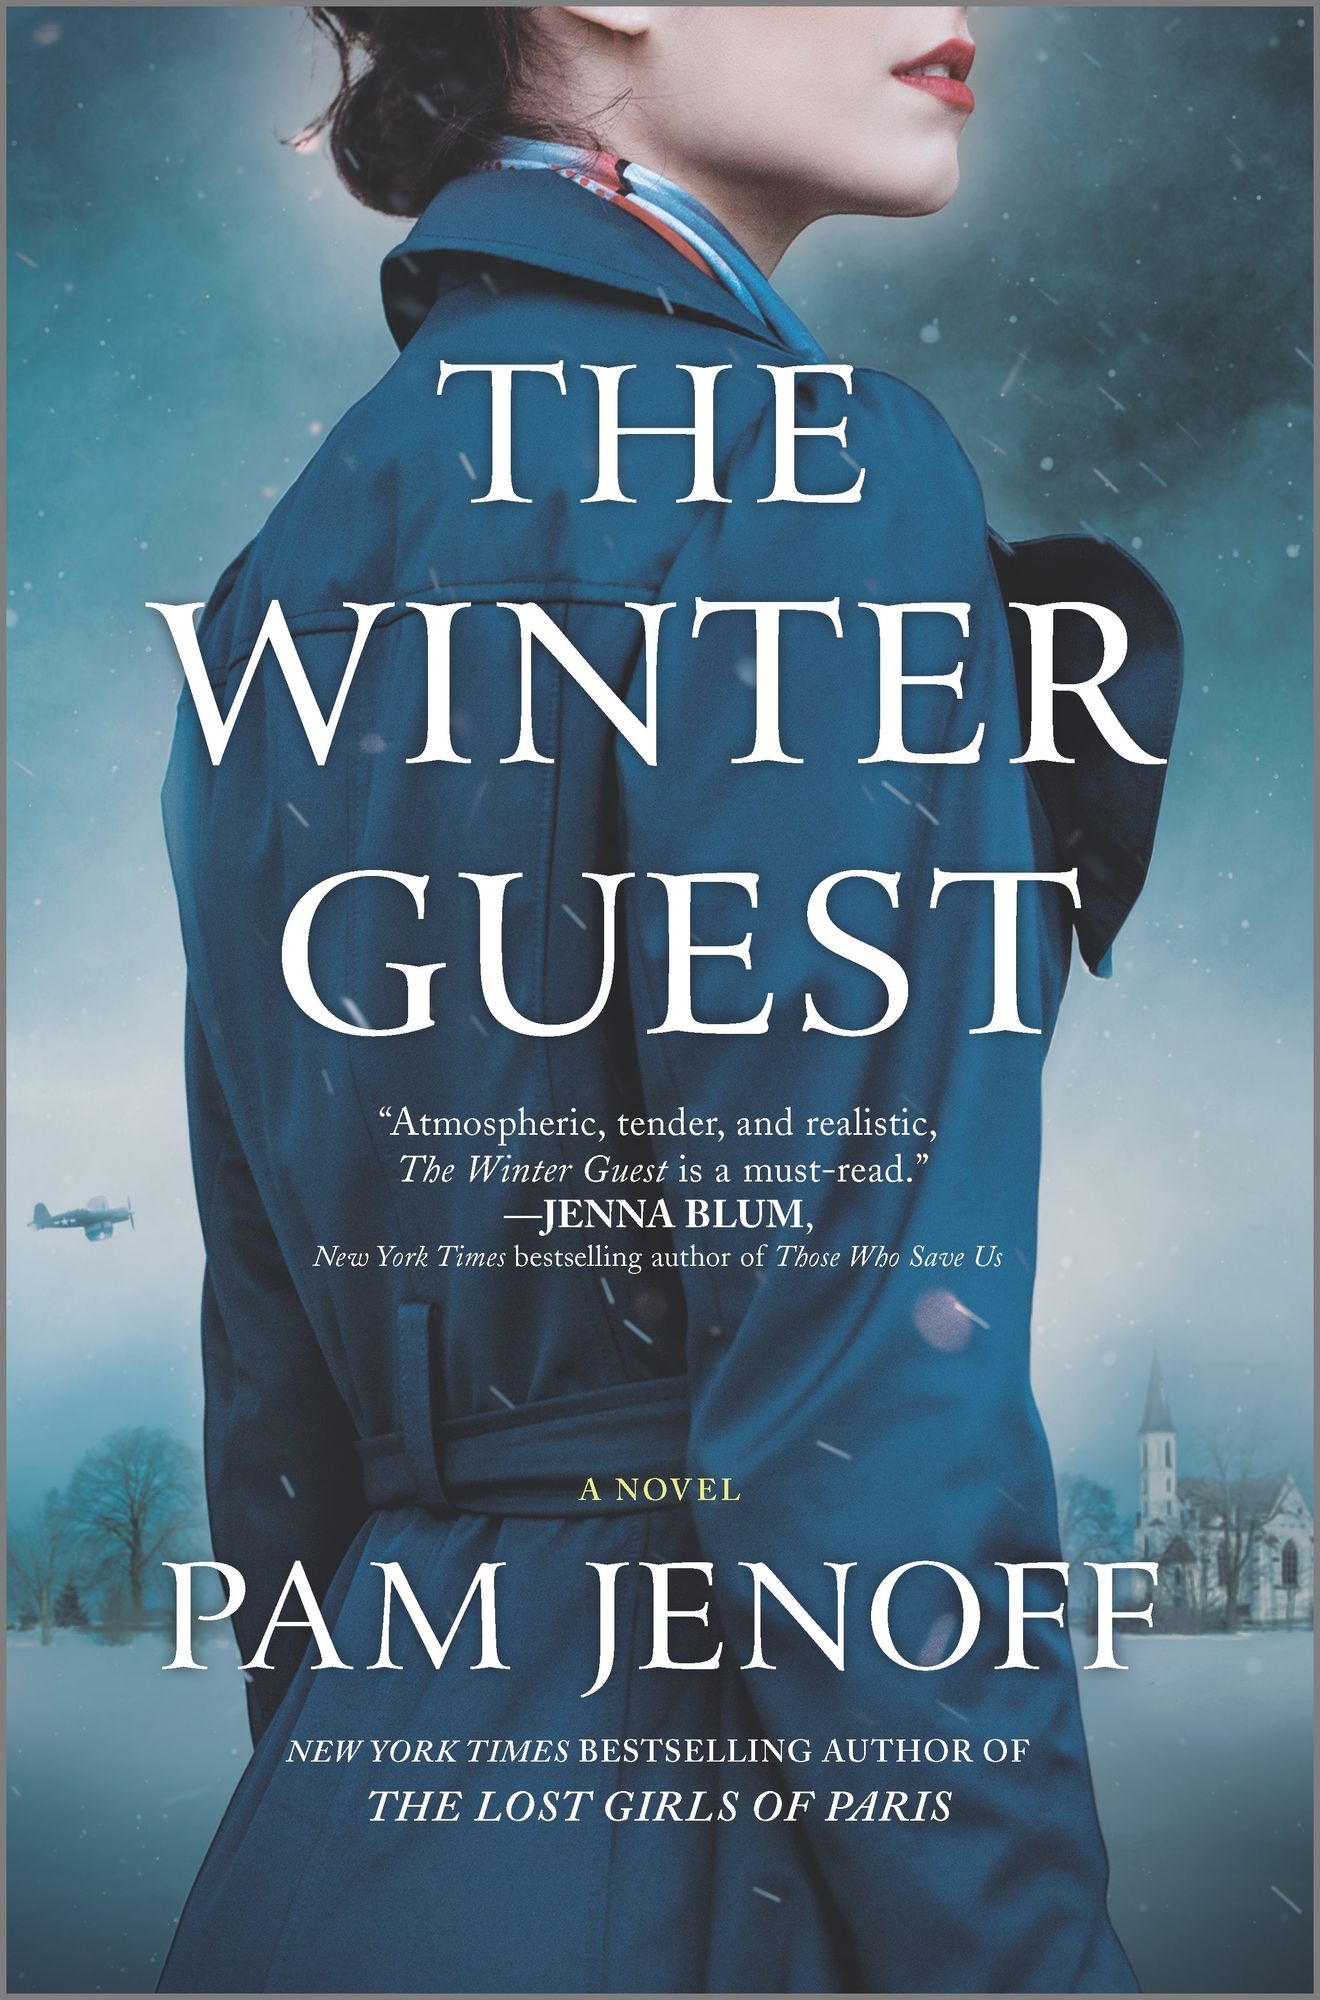 The Winter Guest by Pam Jenoff